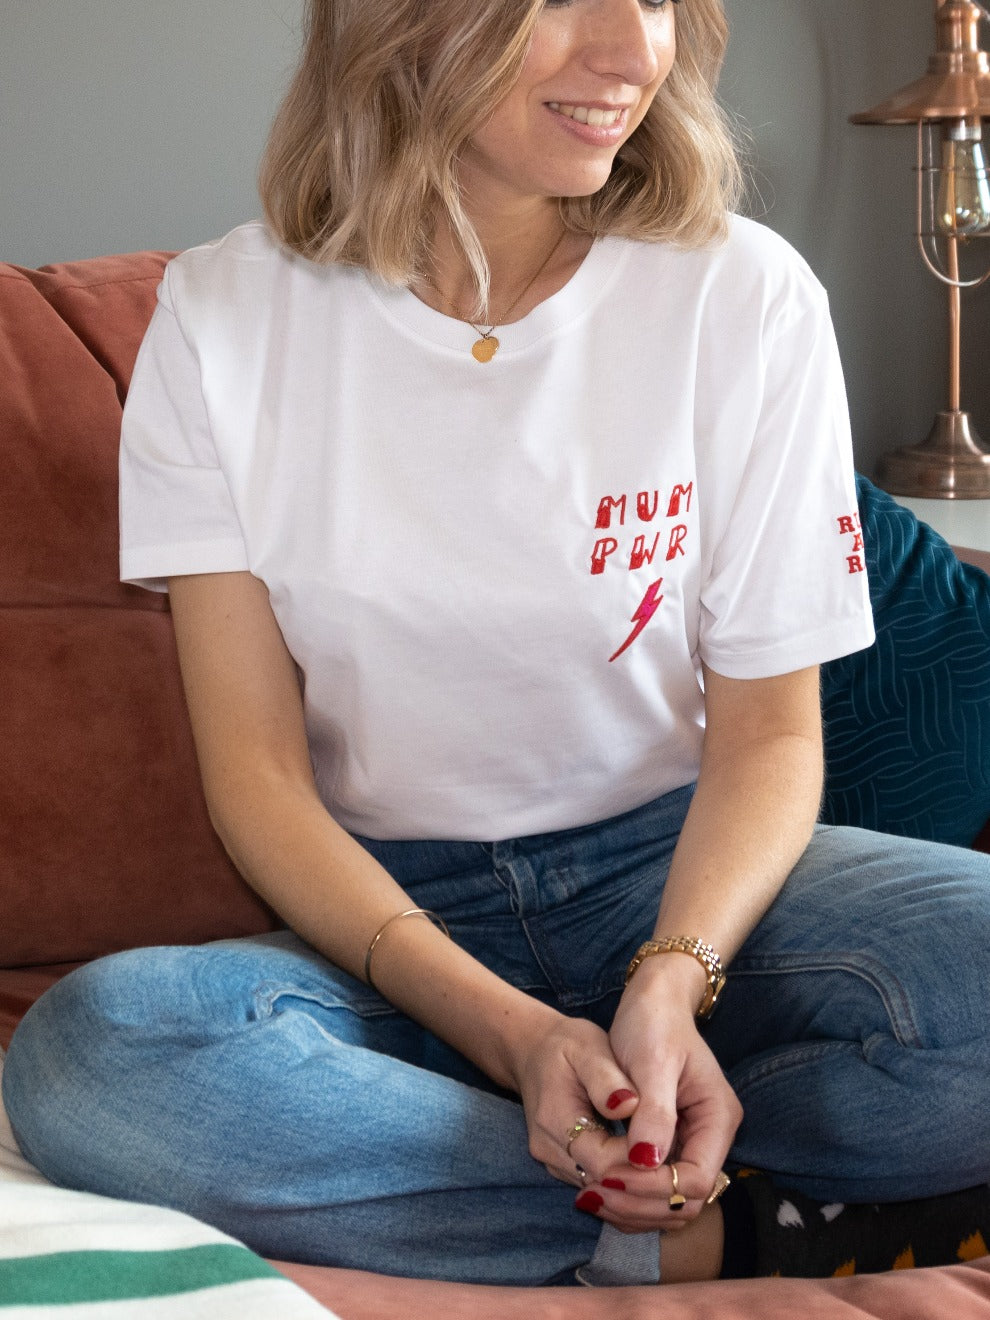 Embroidered Mum Pwr T shirt